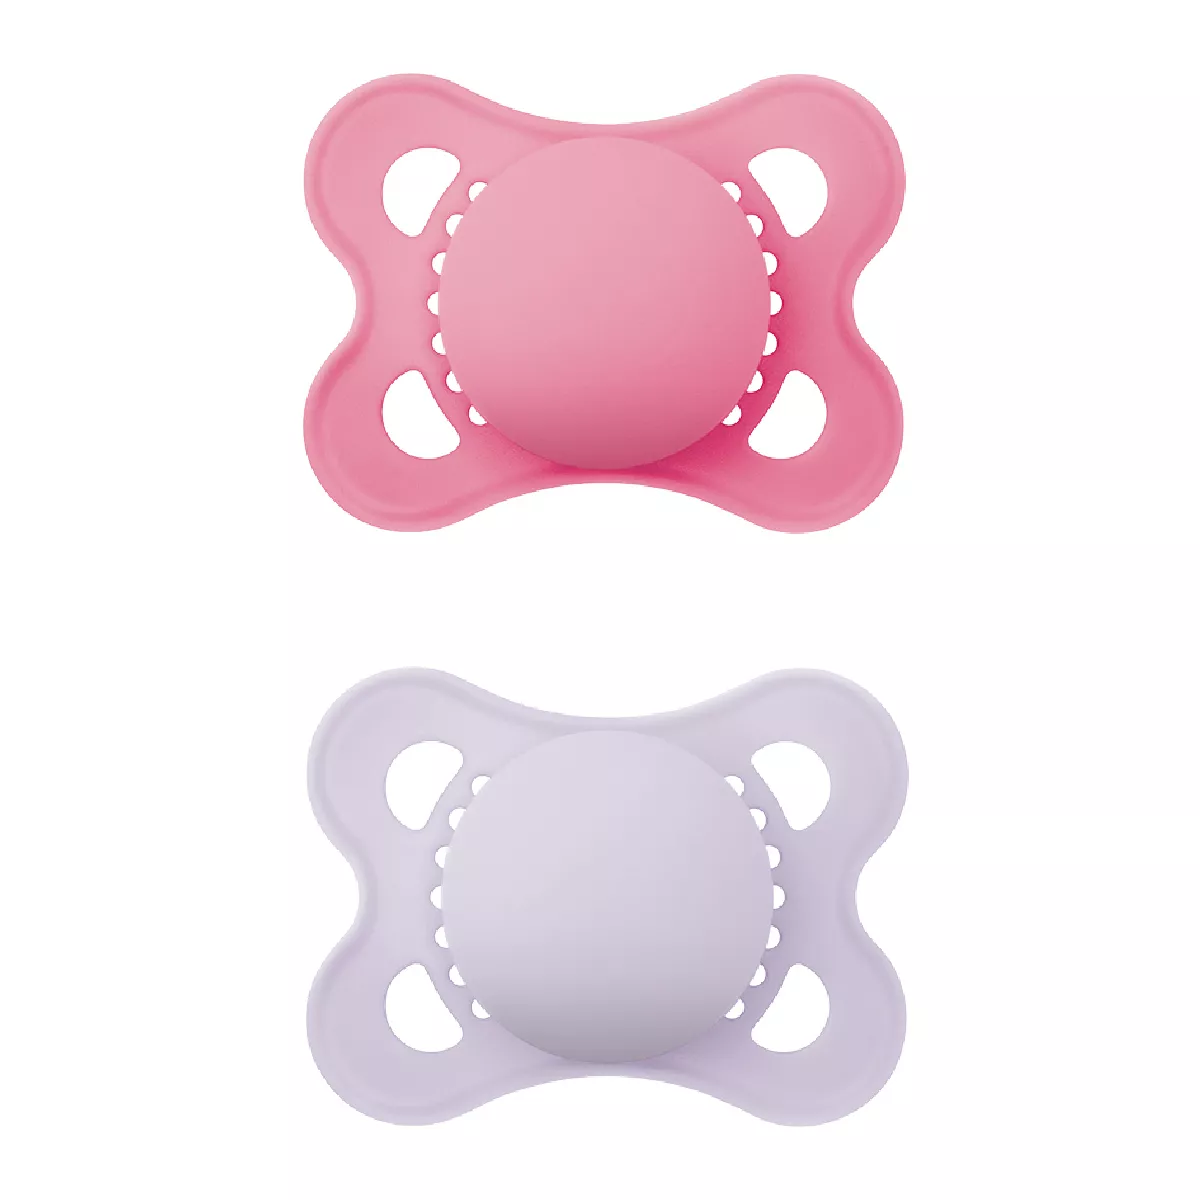 MAM Original Pure Soother 2-6 months, set of 2